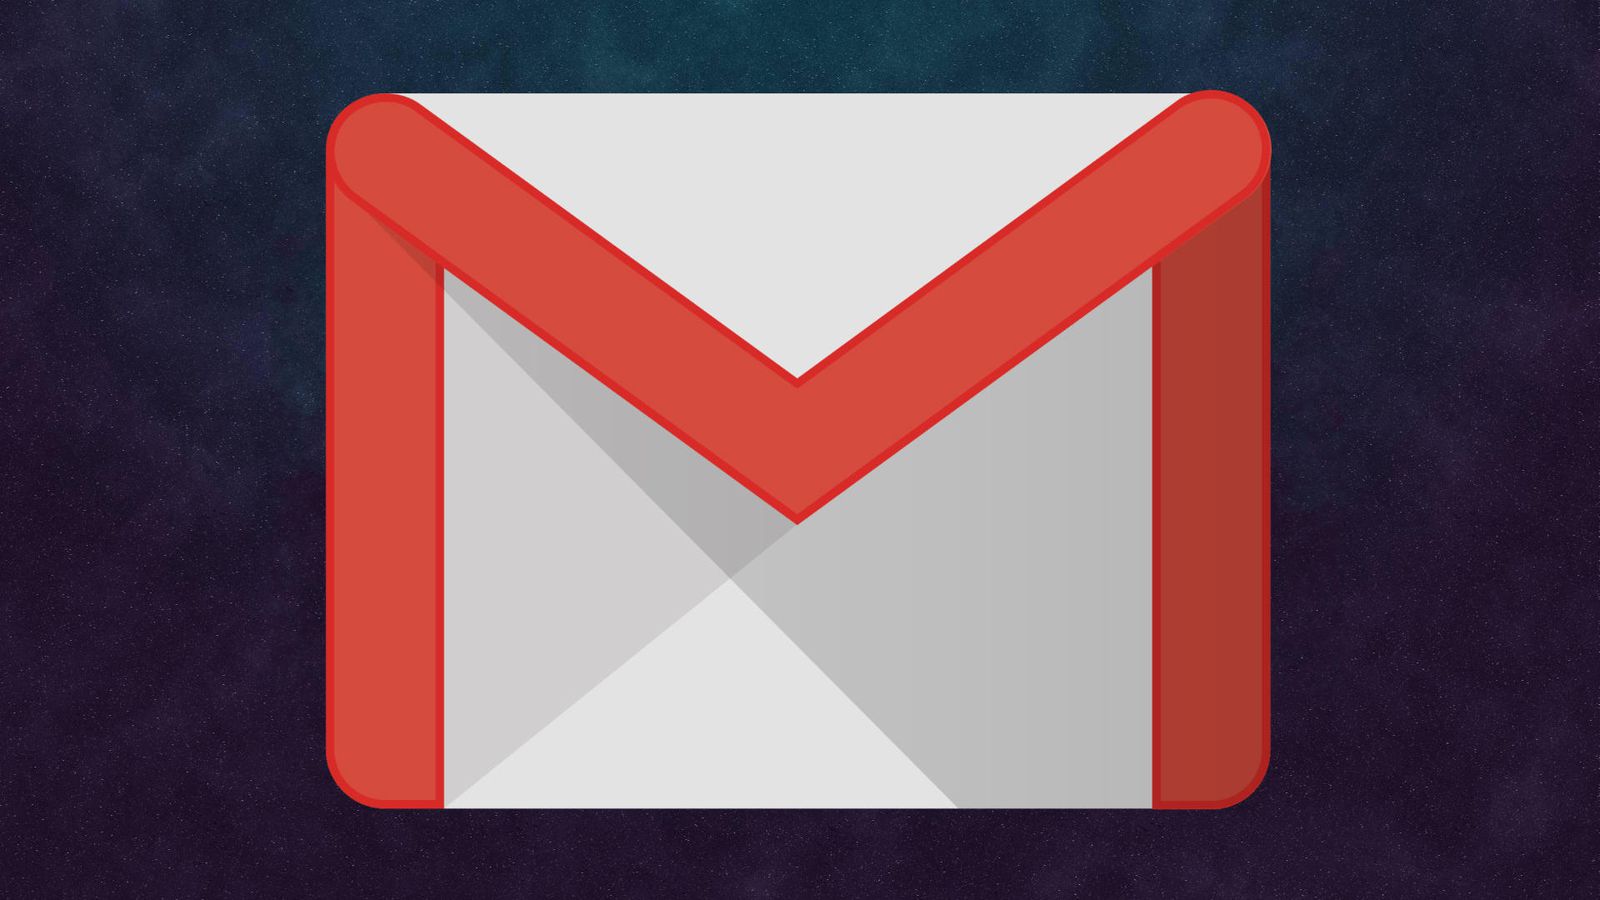 gmail-update-major-changes-are-coming-and-here-s-what-users-need-to